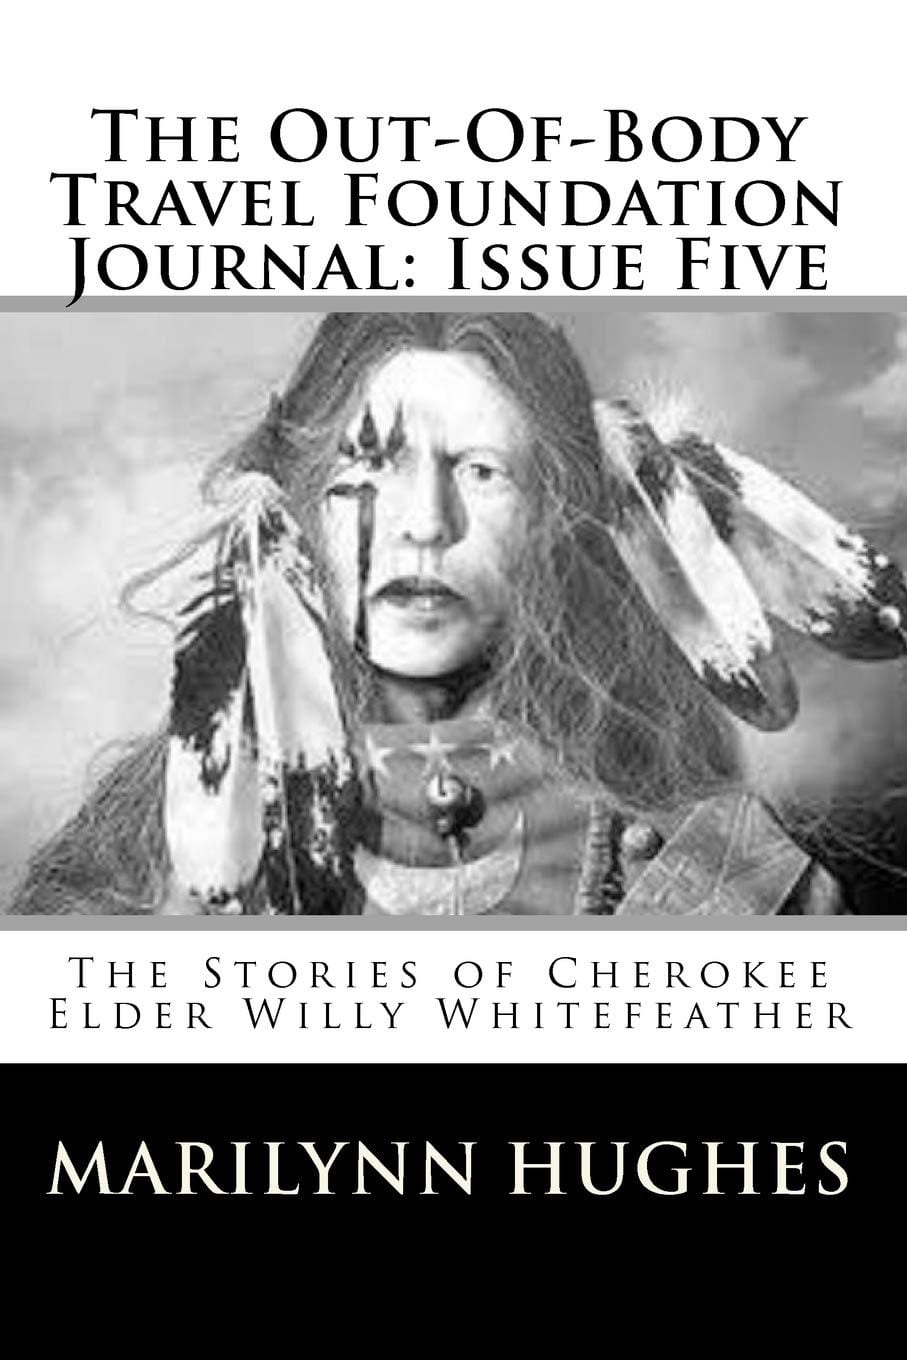 The Stories of Cherokee Elder Willy Whitefeather, By Marilynn Hughes